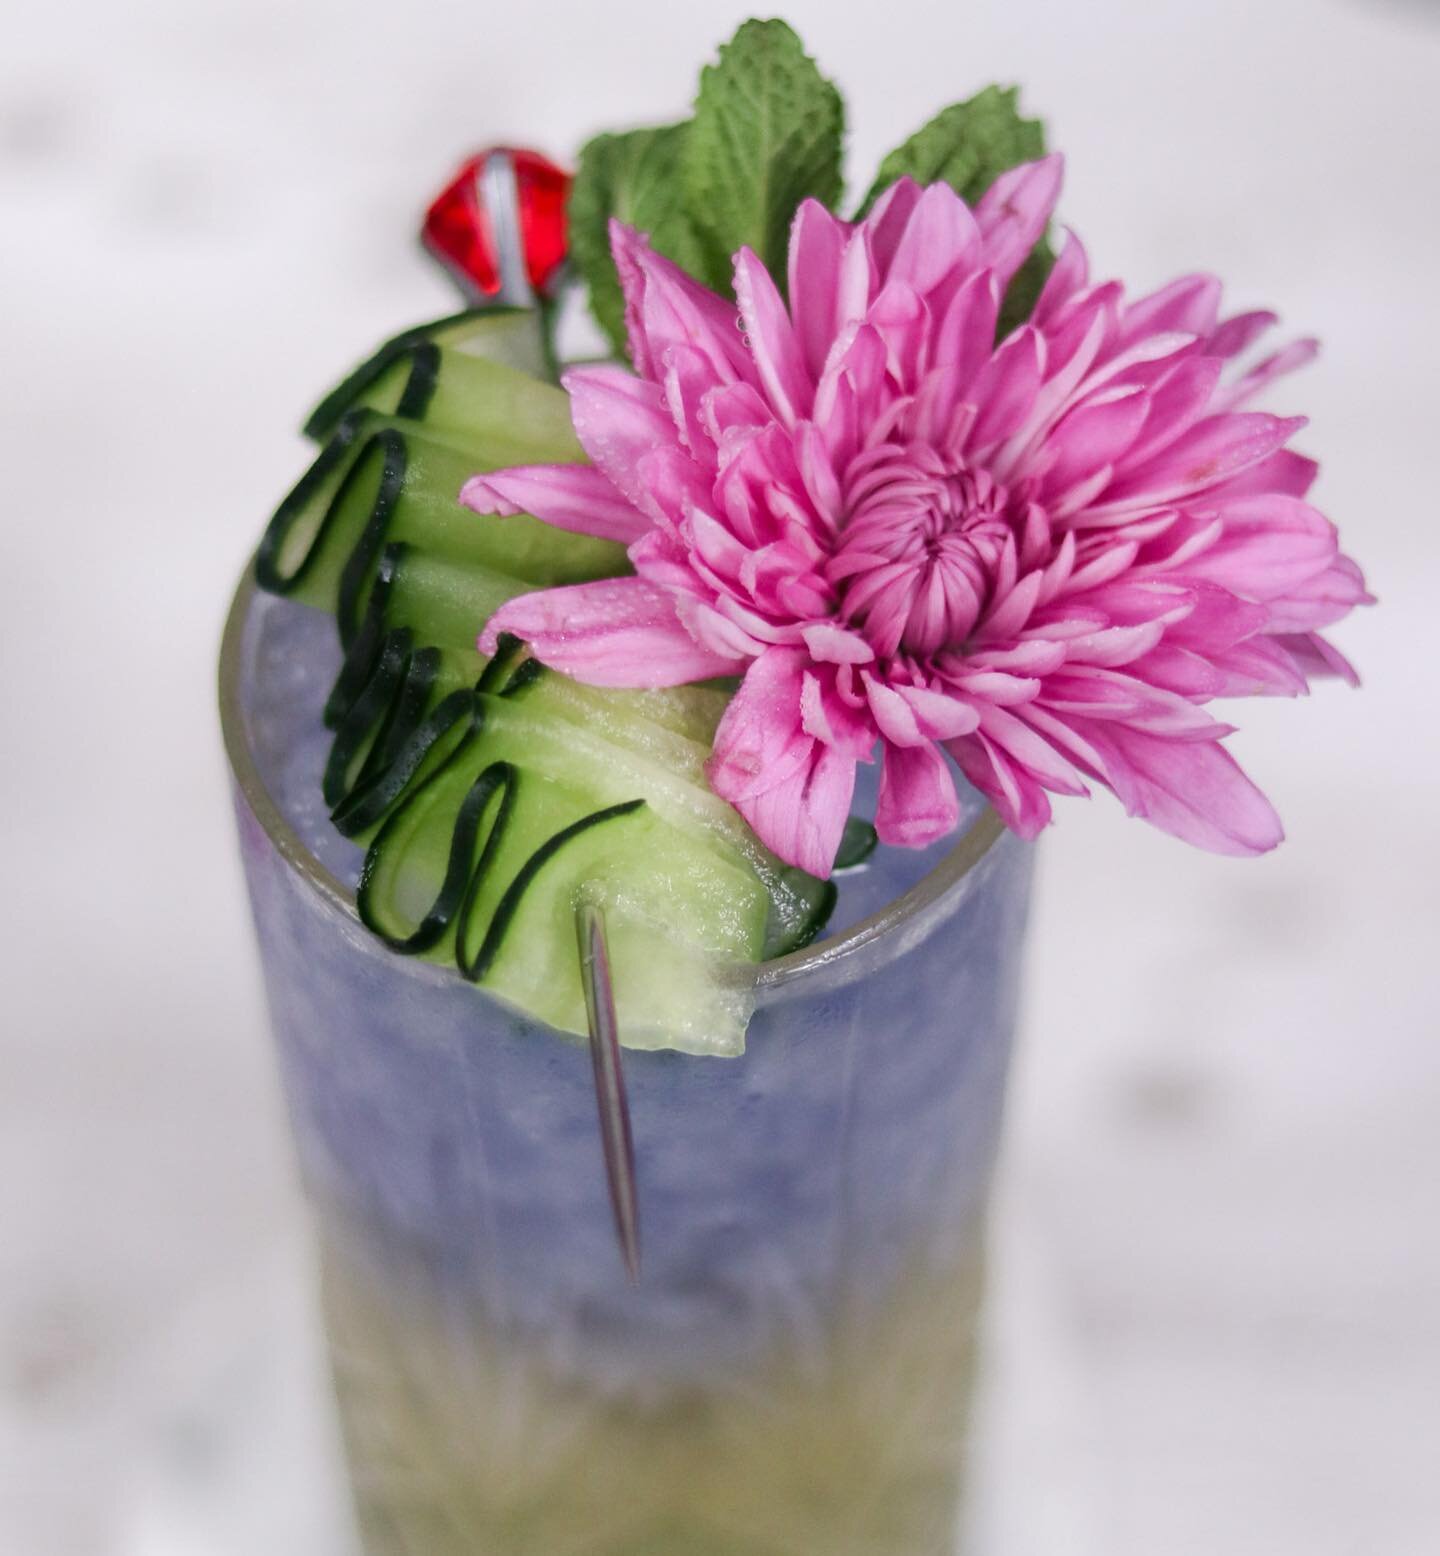 Floral garnishes can really elevate a drink and give it a beautiful presentation like this cocktail which is our take on &ldquo;Empress in the Garden&quot; 🌸 It's the perfect drink to have at your spring gatherings, weddings, or bridal showers 🥰 As